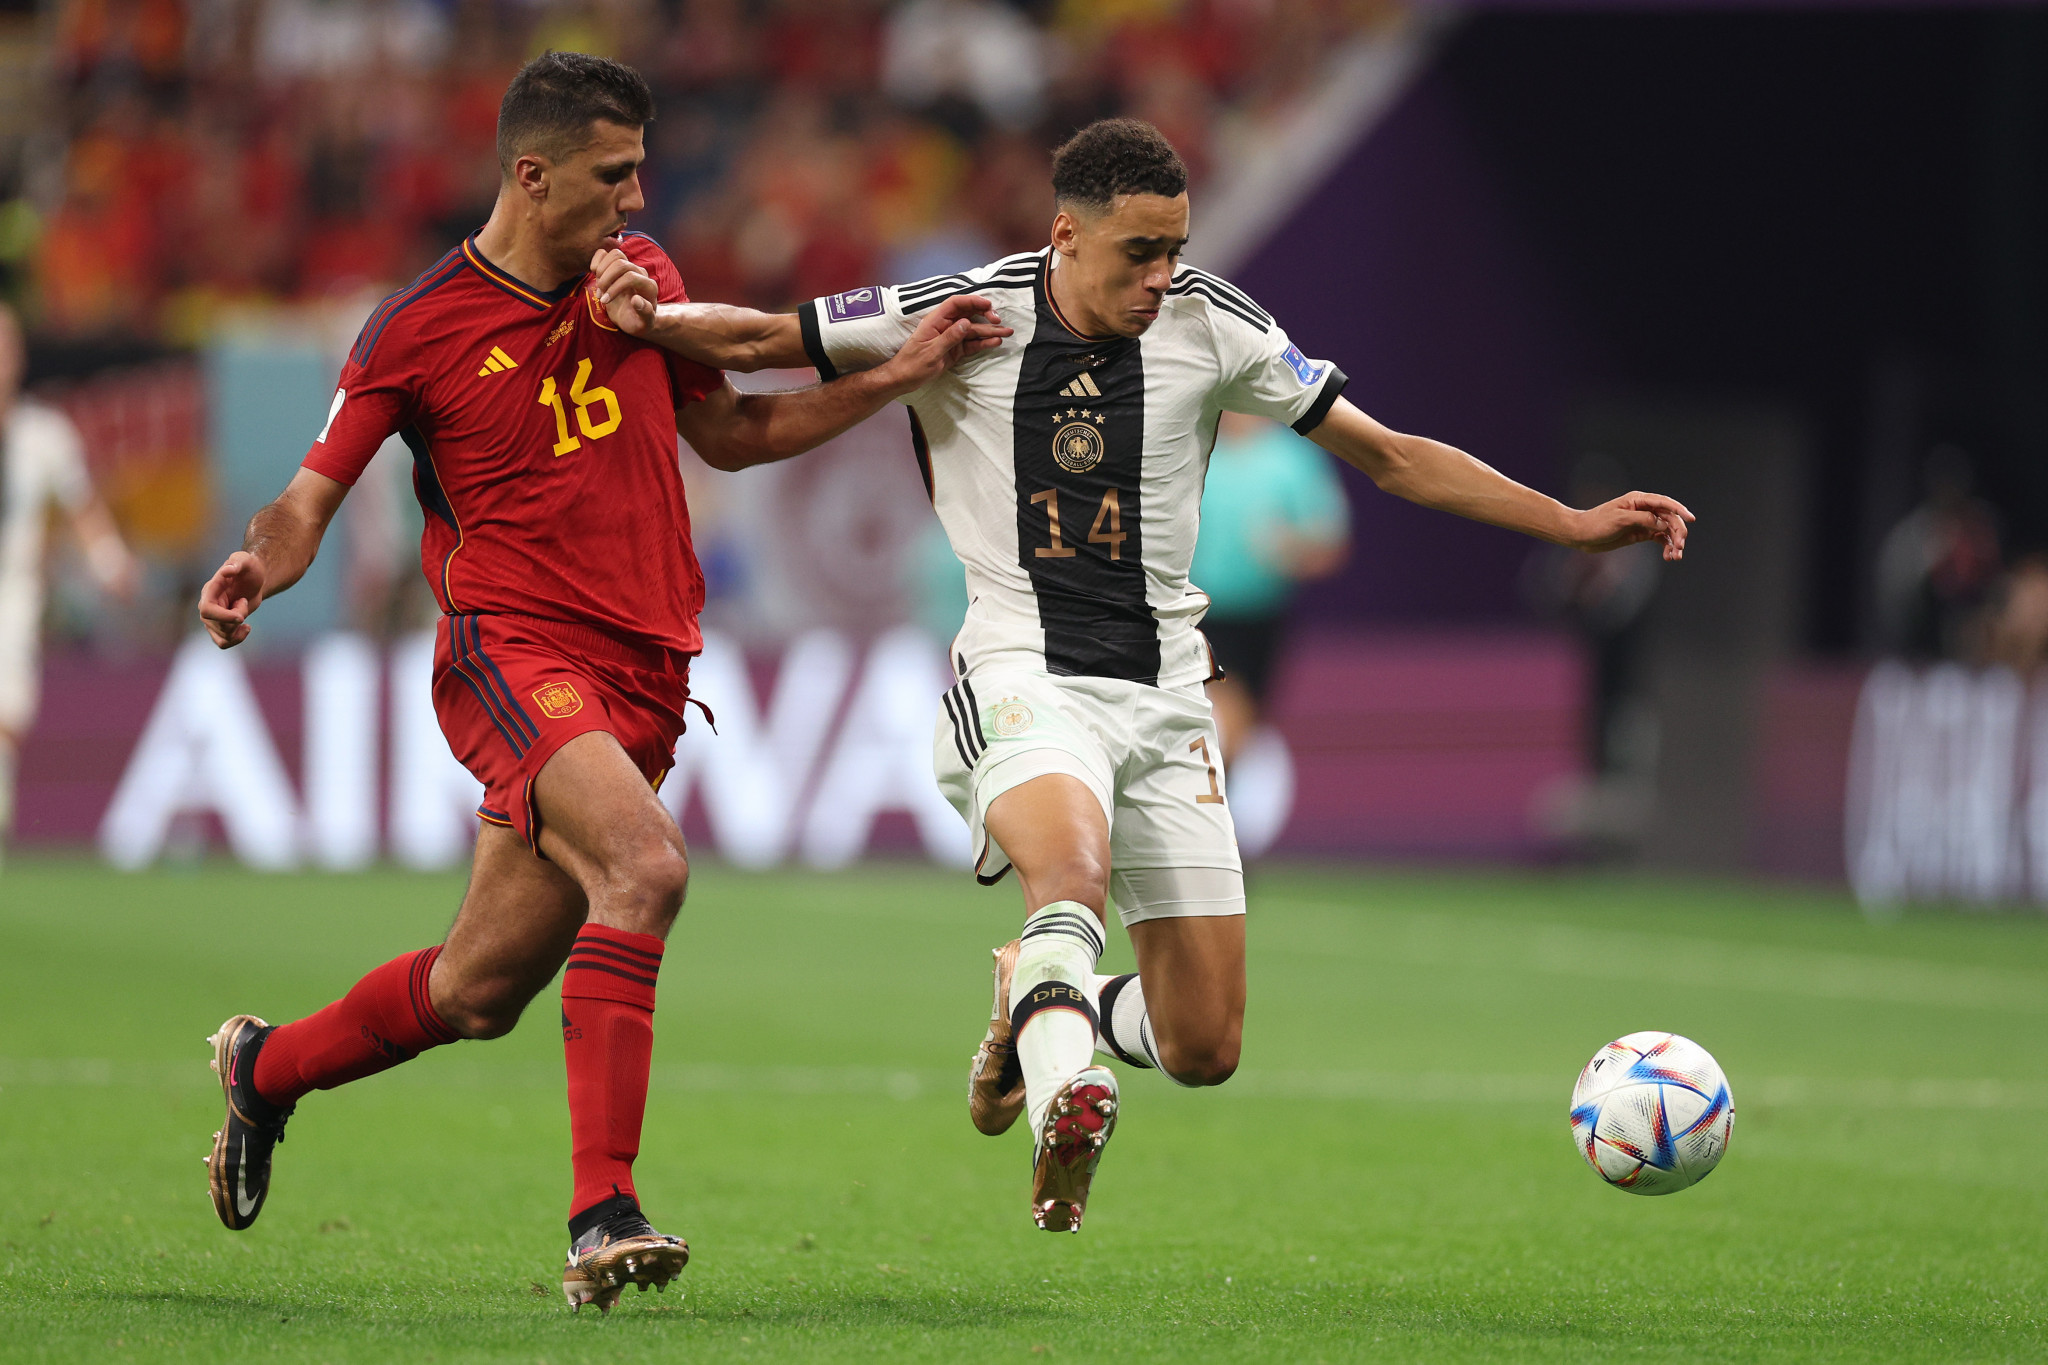 Spain's match against Germany was widely viewed in Spain, but viewership figures in Germany are down on previous World Cups ©Getty Images